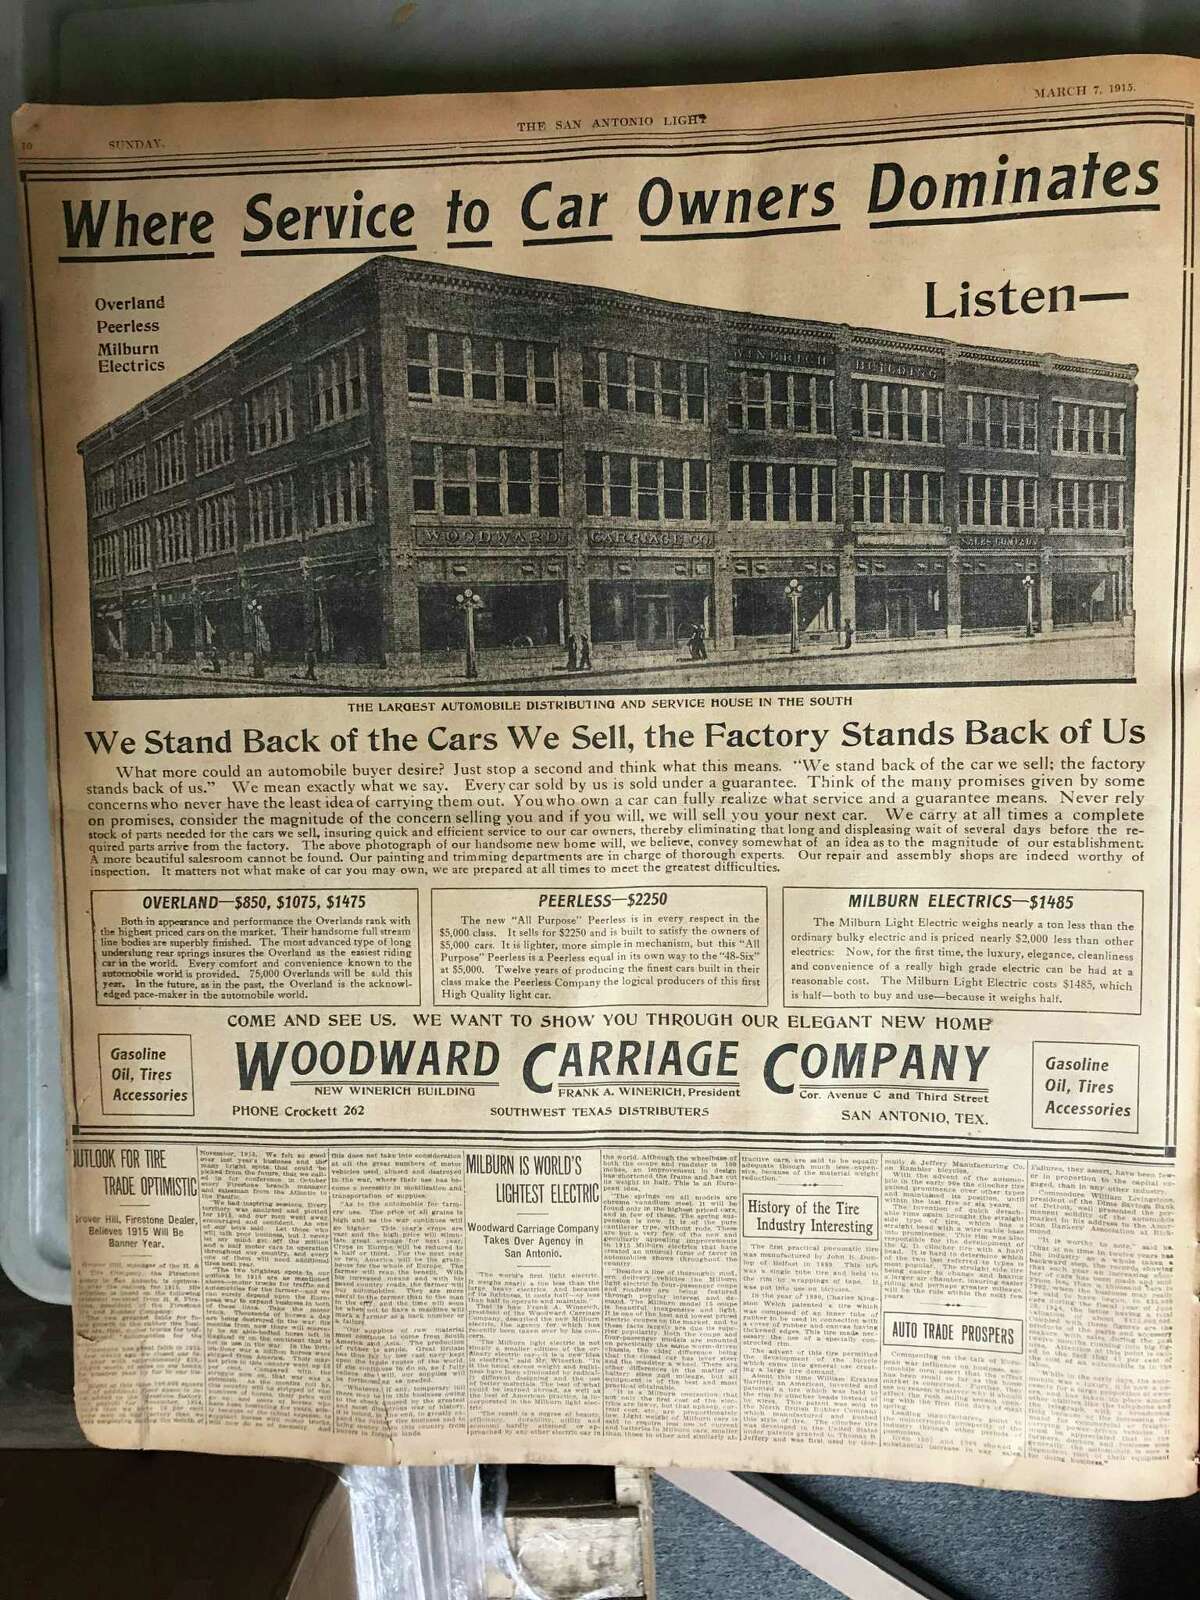 As featured in the San Antonio Light, March 7, 1915, the Woodward Carriage Co., newly opened in the “new Winerich Building” at Avenue C (later Broadway) and Third Street, sold new cars including the Overland. Winerich Motor Sales sold the first Edsel in San Antonio from their 1822 Broadway location, here shown promoting the Sept. 4, 1957, date the new model went on sale.